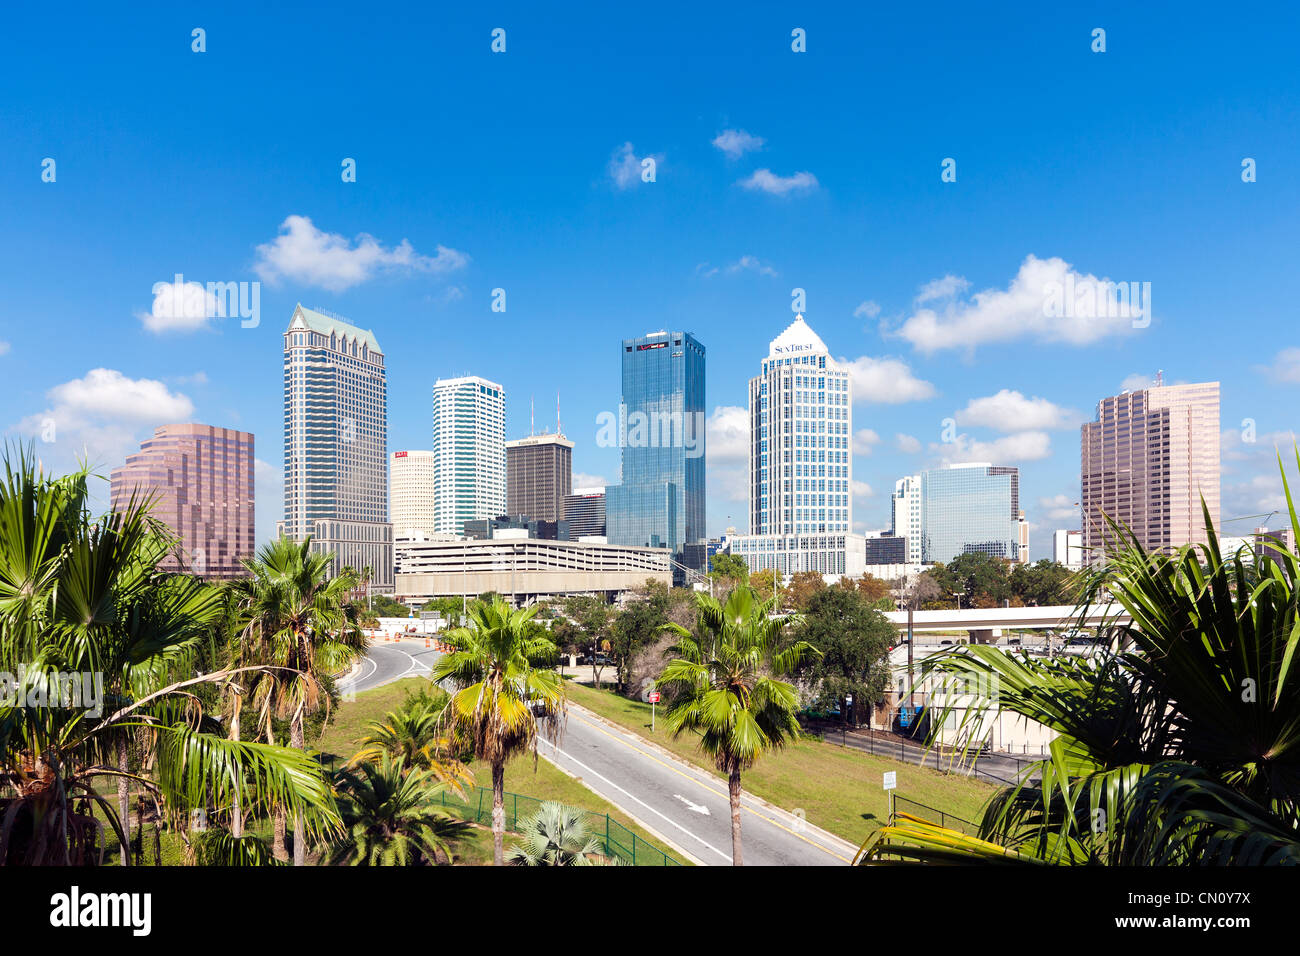 Tampa Florida Downtown cityscape skyline with palms Stock Photo